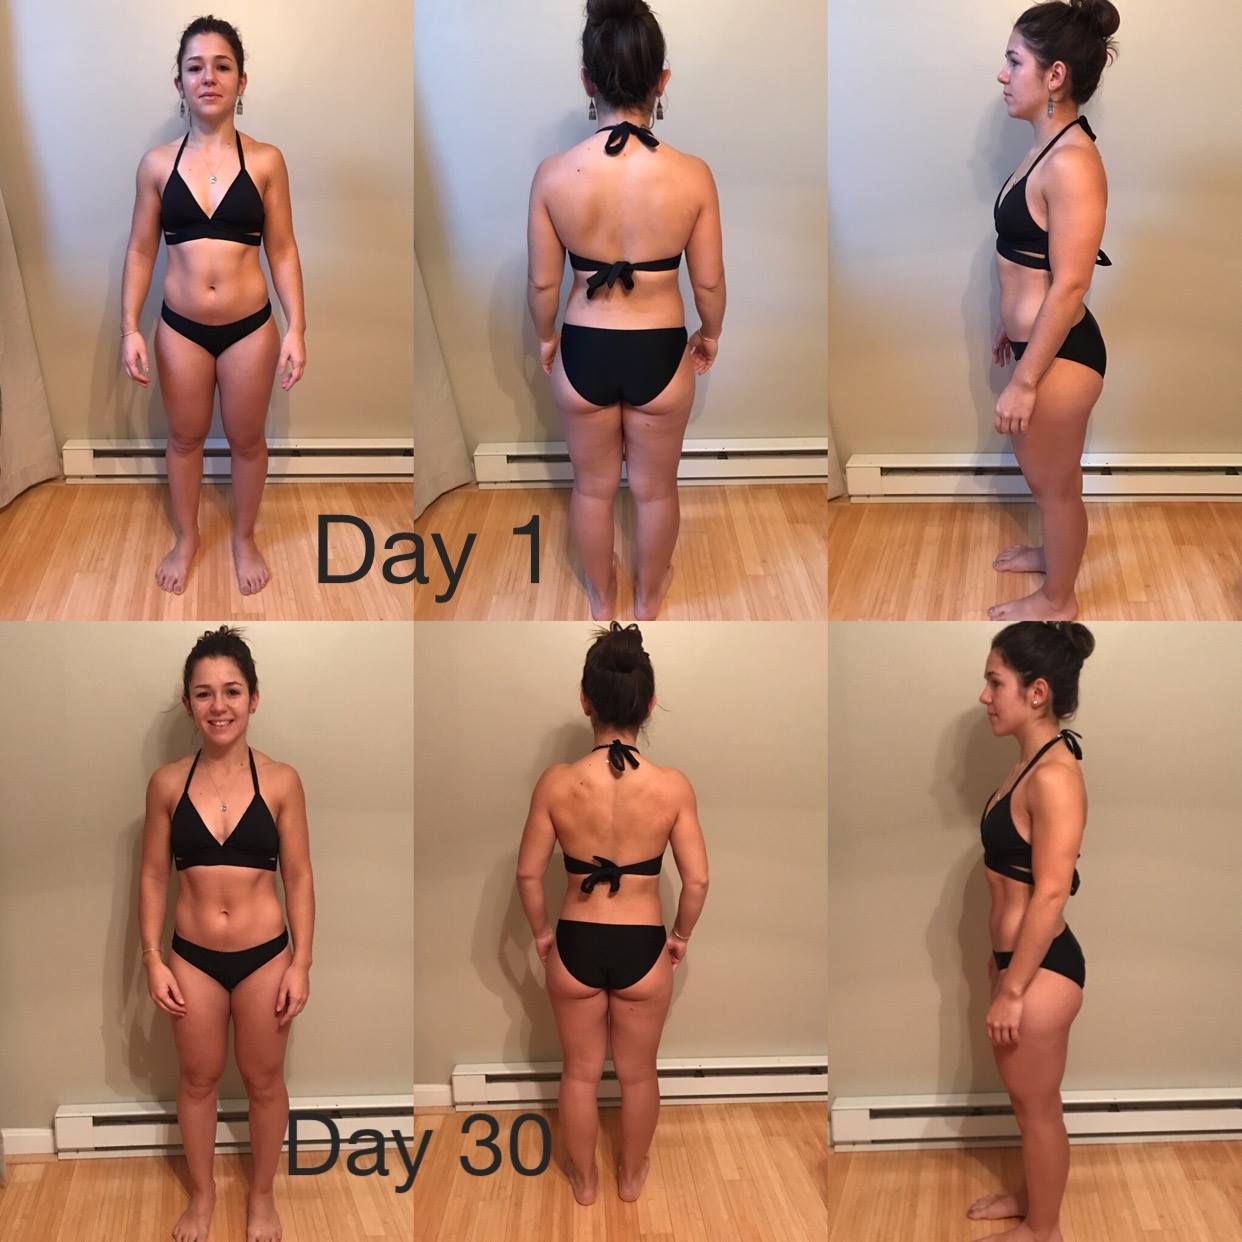 Transformations from The Fitness Asylum's Nutrition Programs